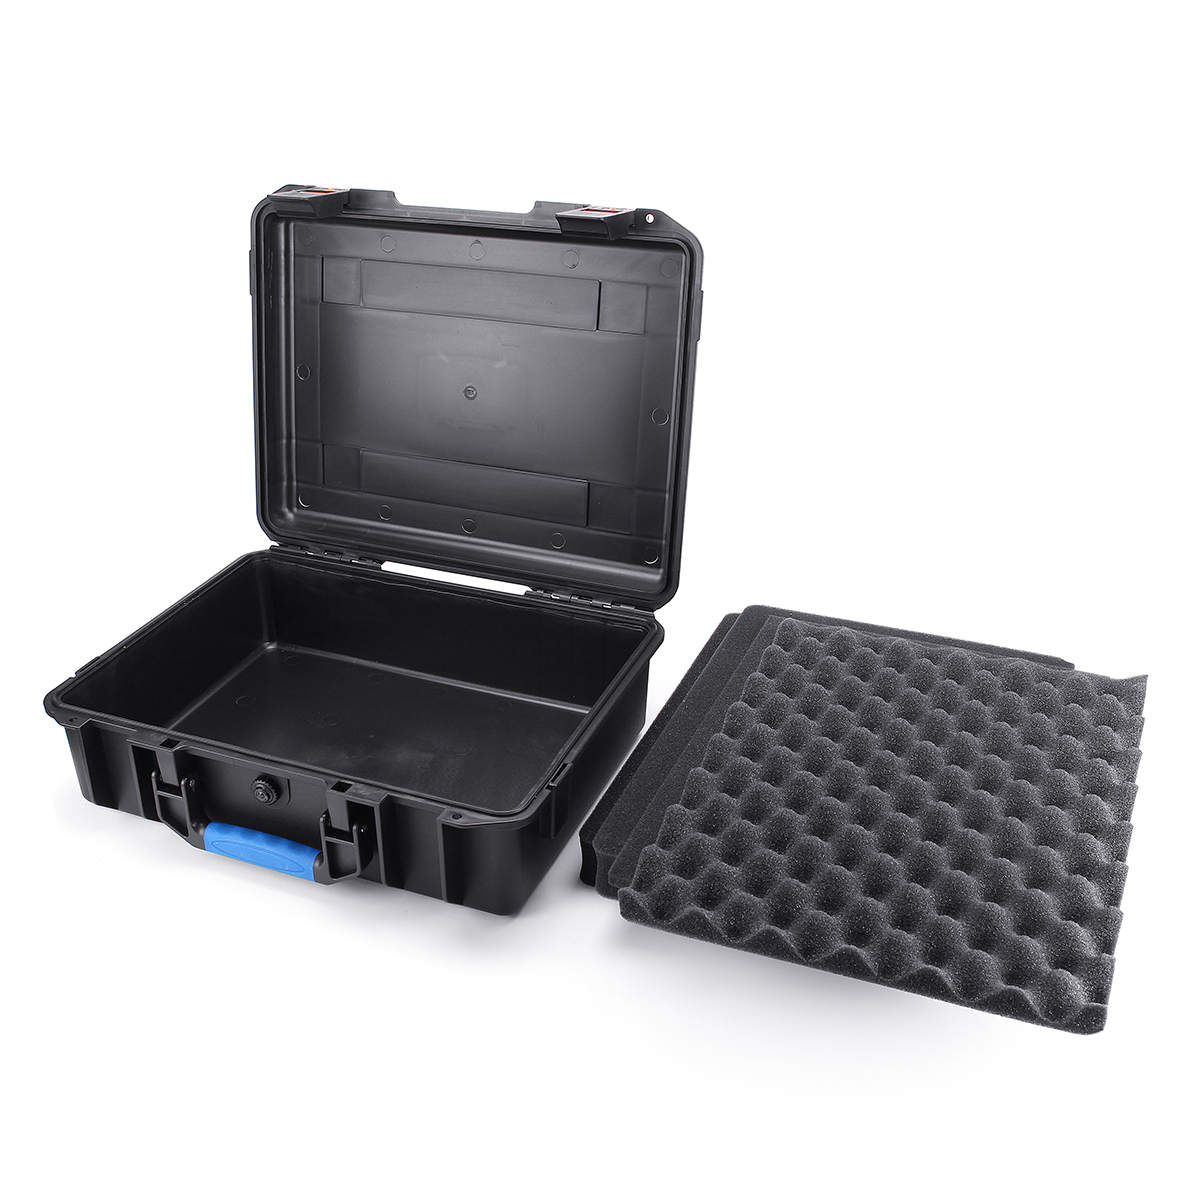 Waterproof-Hard-Carry-Case-Tool-Kits-Impact-Resistant-Shockproof-Storage-Box-Safety-Hardware-toolbox-1665199-10